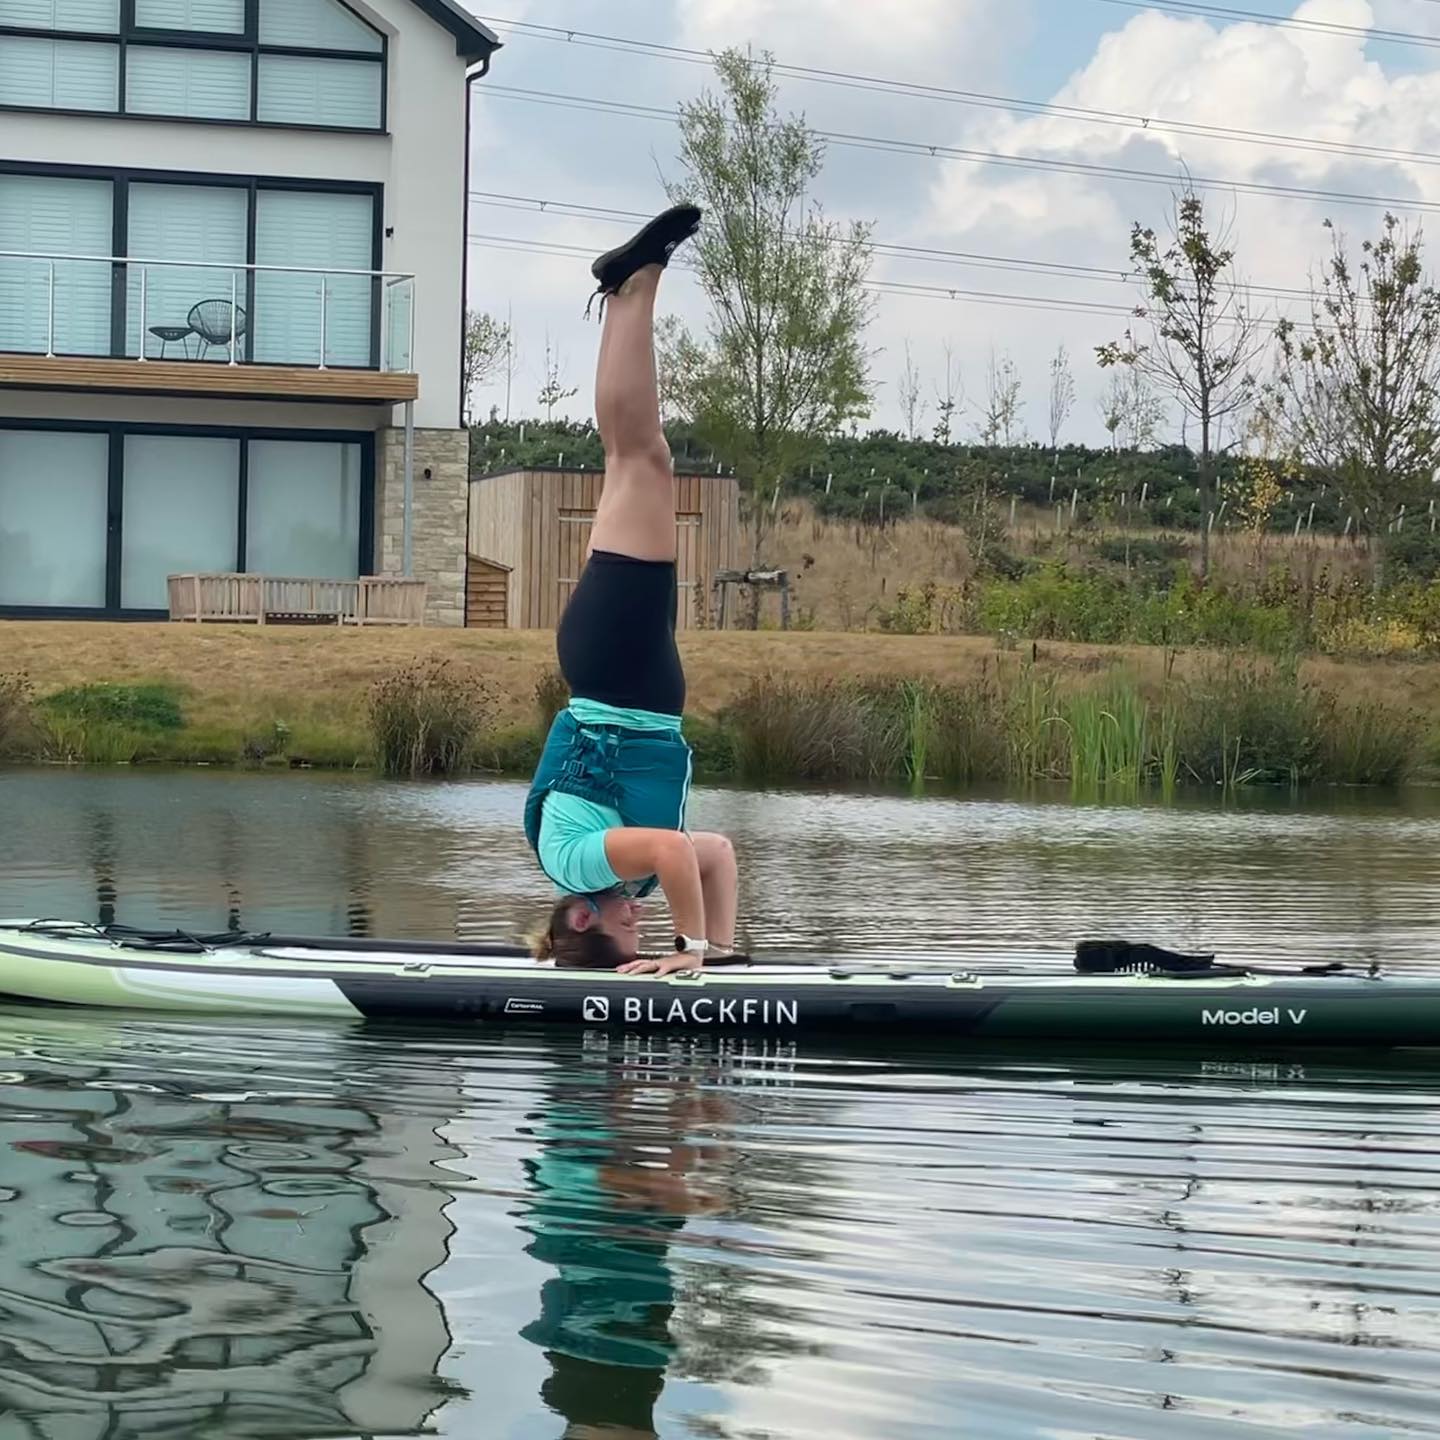 Afternoon paddle whilst documenting @rachelflisher and her SUP yoga (with outtakes!) 🚣‍♀️🧘‍♀️